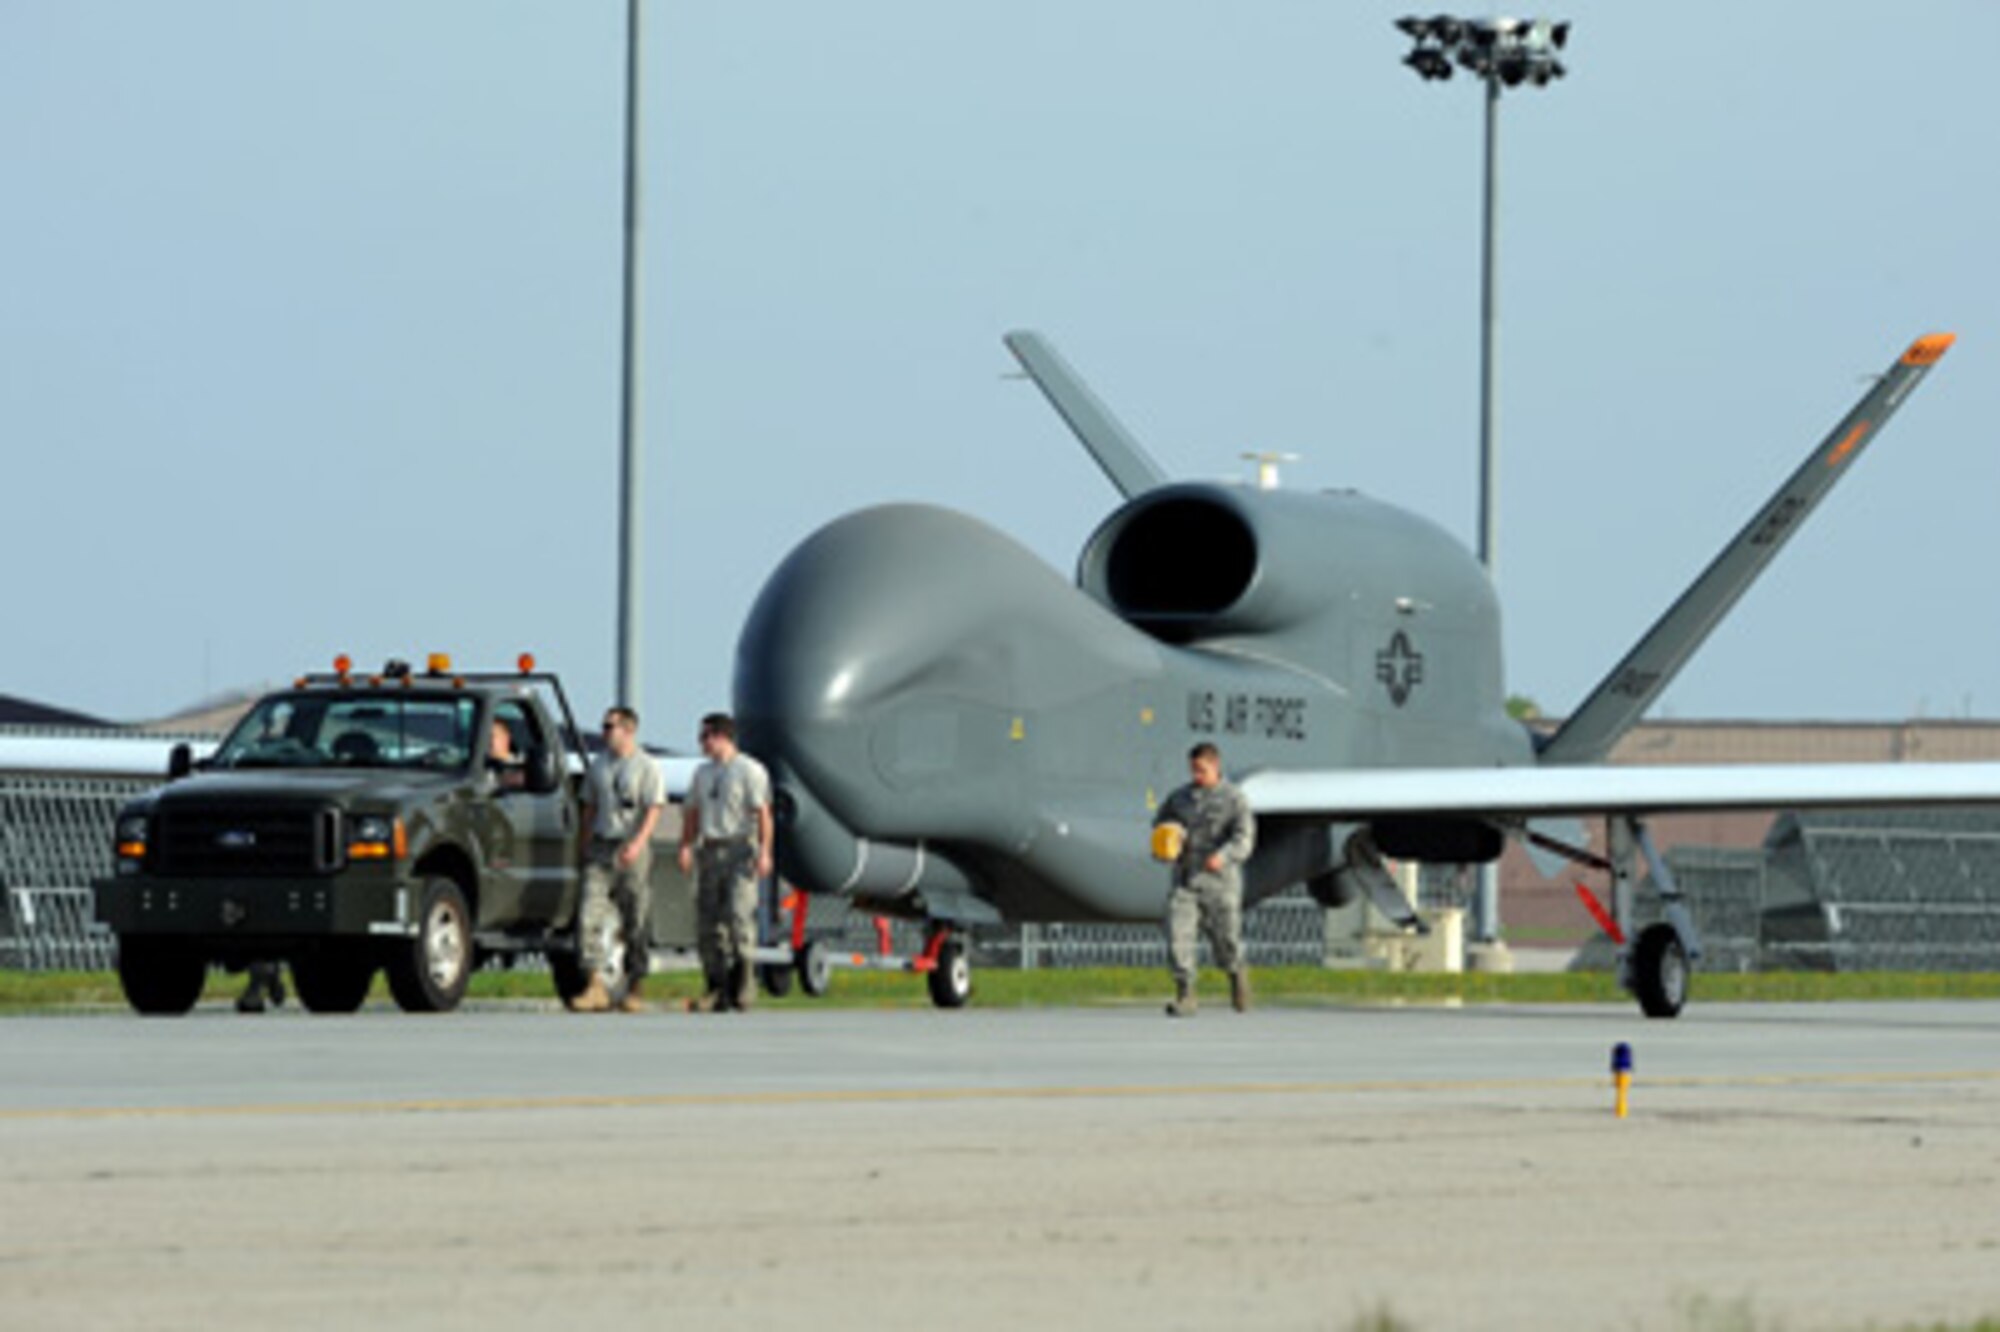 Airmen from Grand Forks Air Force Base, N.D., welcome the first RQ-4 Global Hawk to the base May 26, 2011. The arrival marked the beginning of a new era of remotely piloted aircraft at the base. (U.S. Air Force photo/Tech. Sgt. Johnny Saldivar)